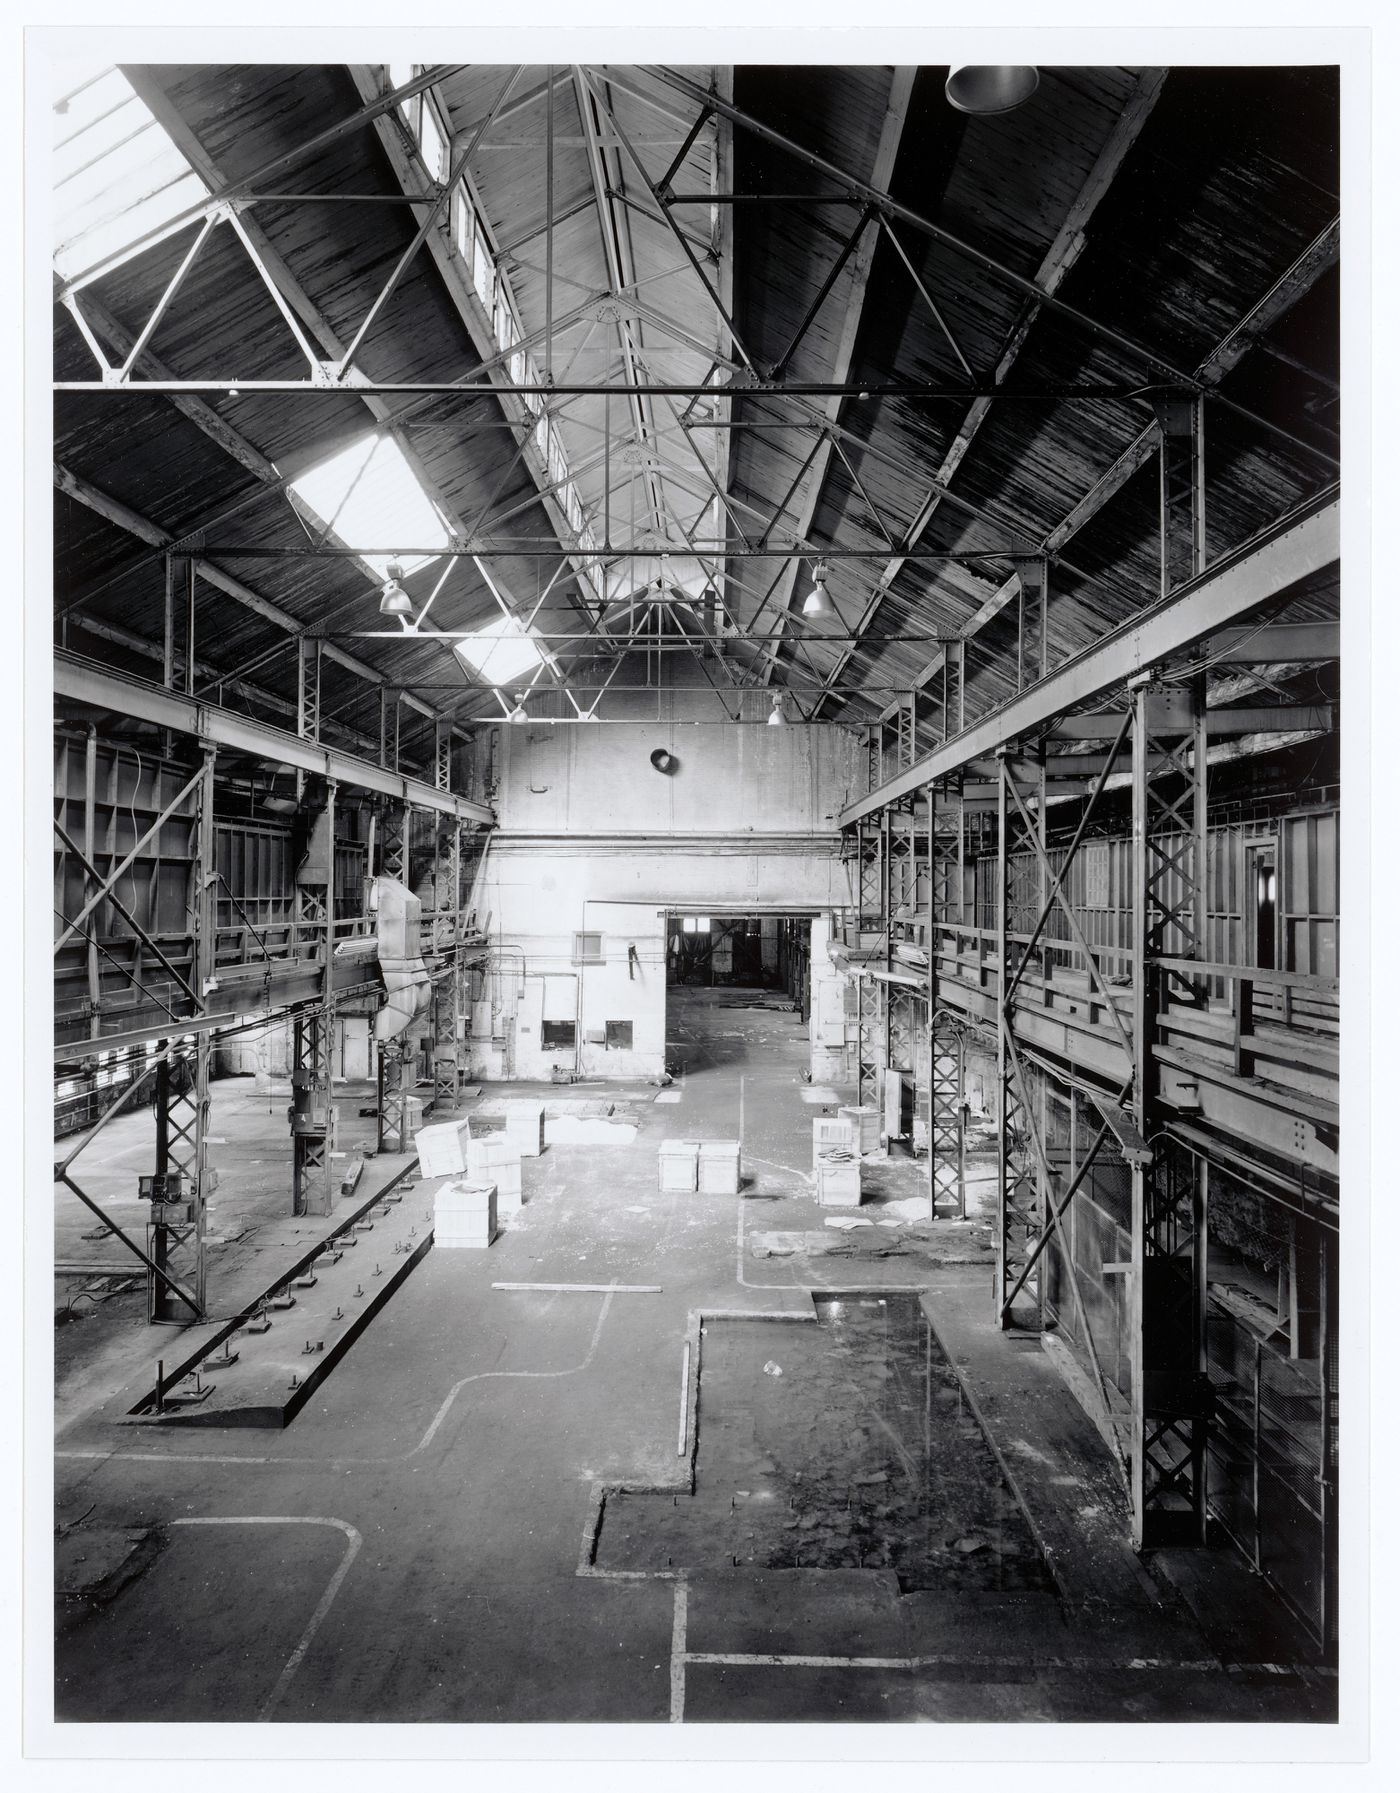 Interior view of workshops on the main floor of the Caledonian Ironworks Building from the mezzanine, Montréal, Québec